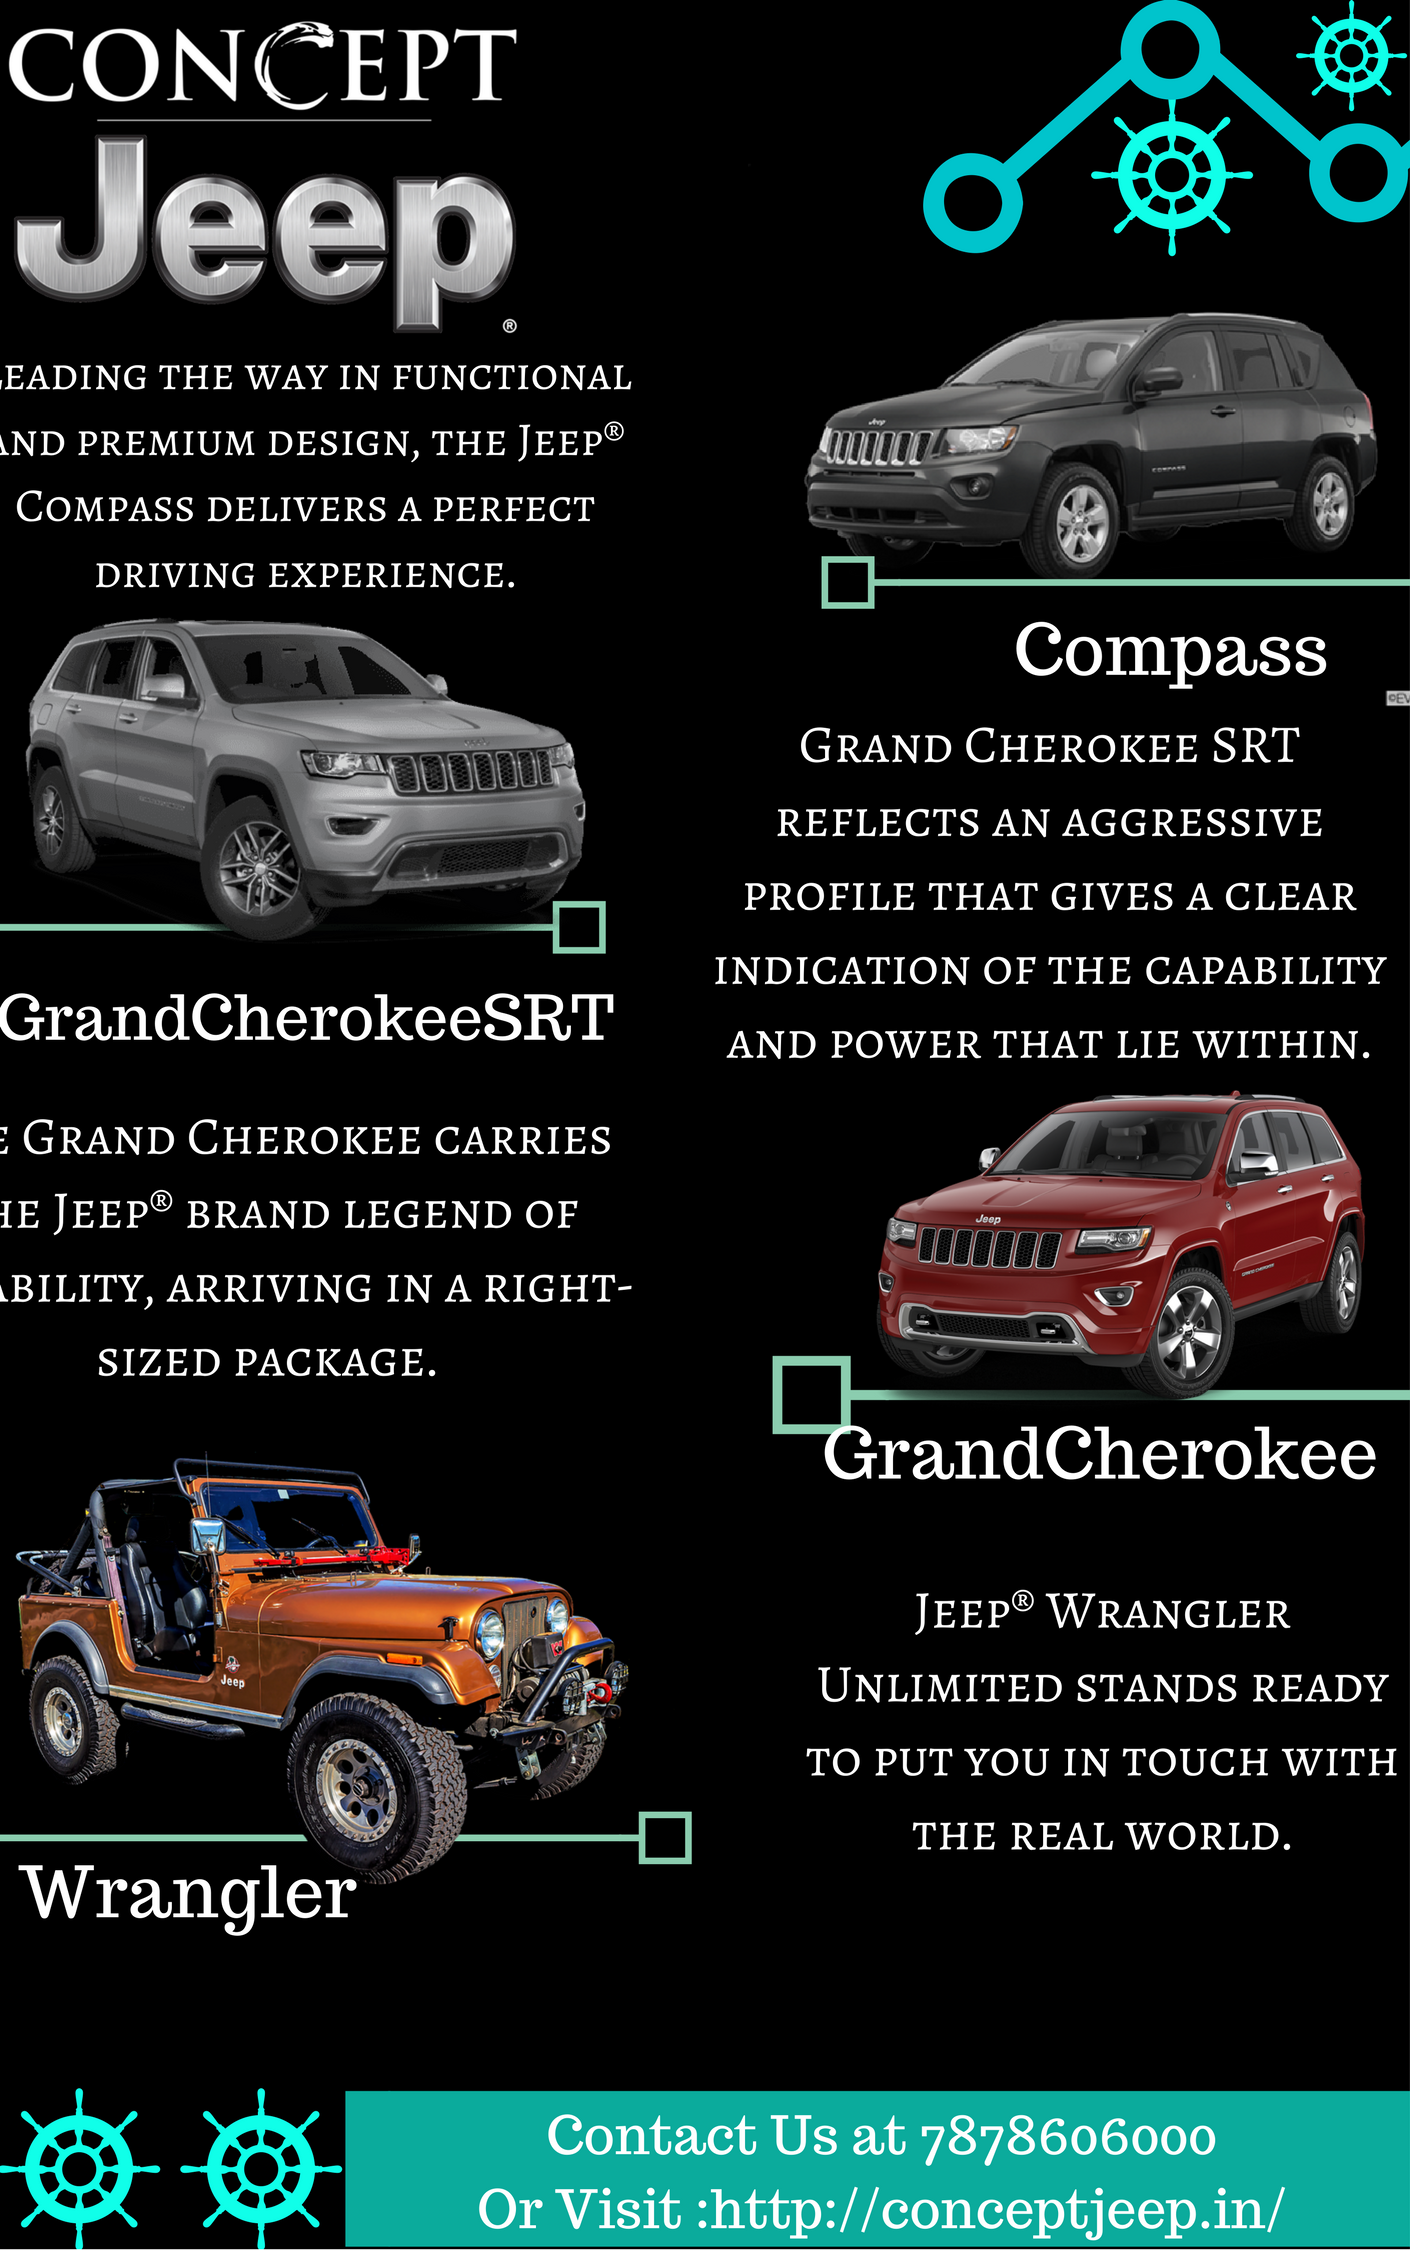 The Concept Jeep Ahmedabad the best Car selling Company-Book your test